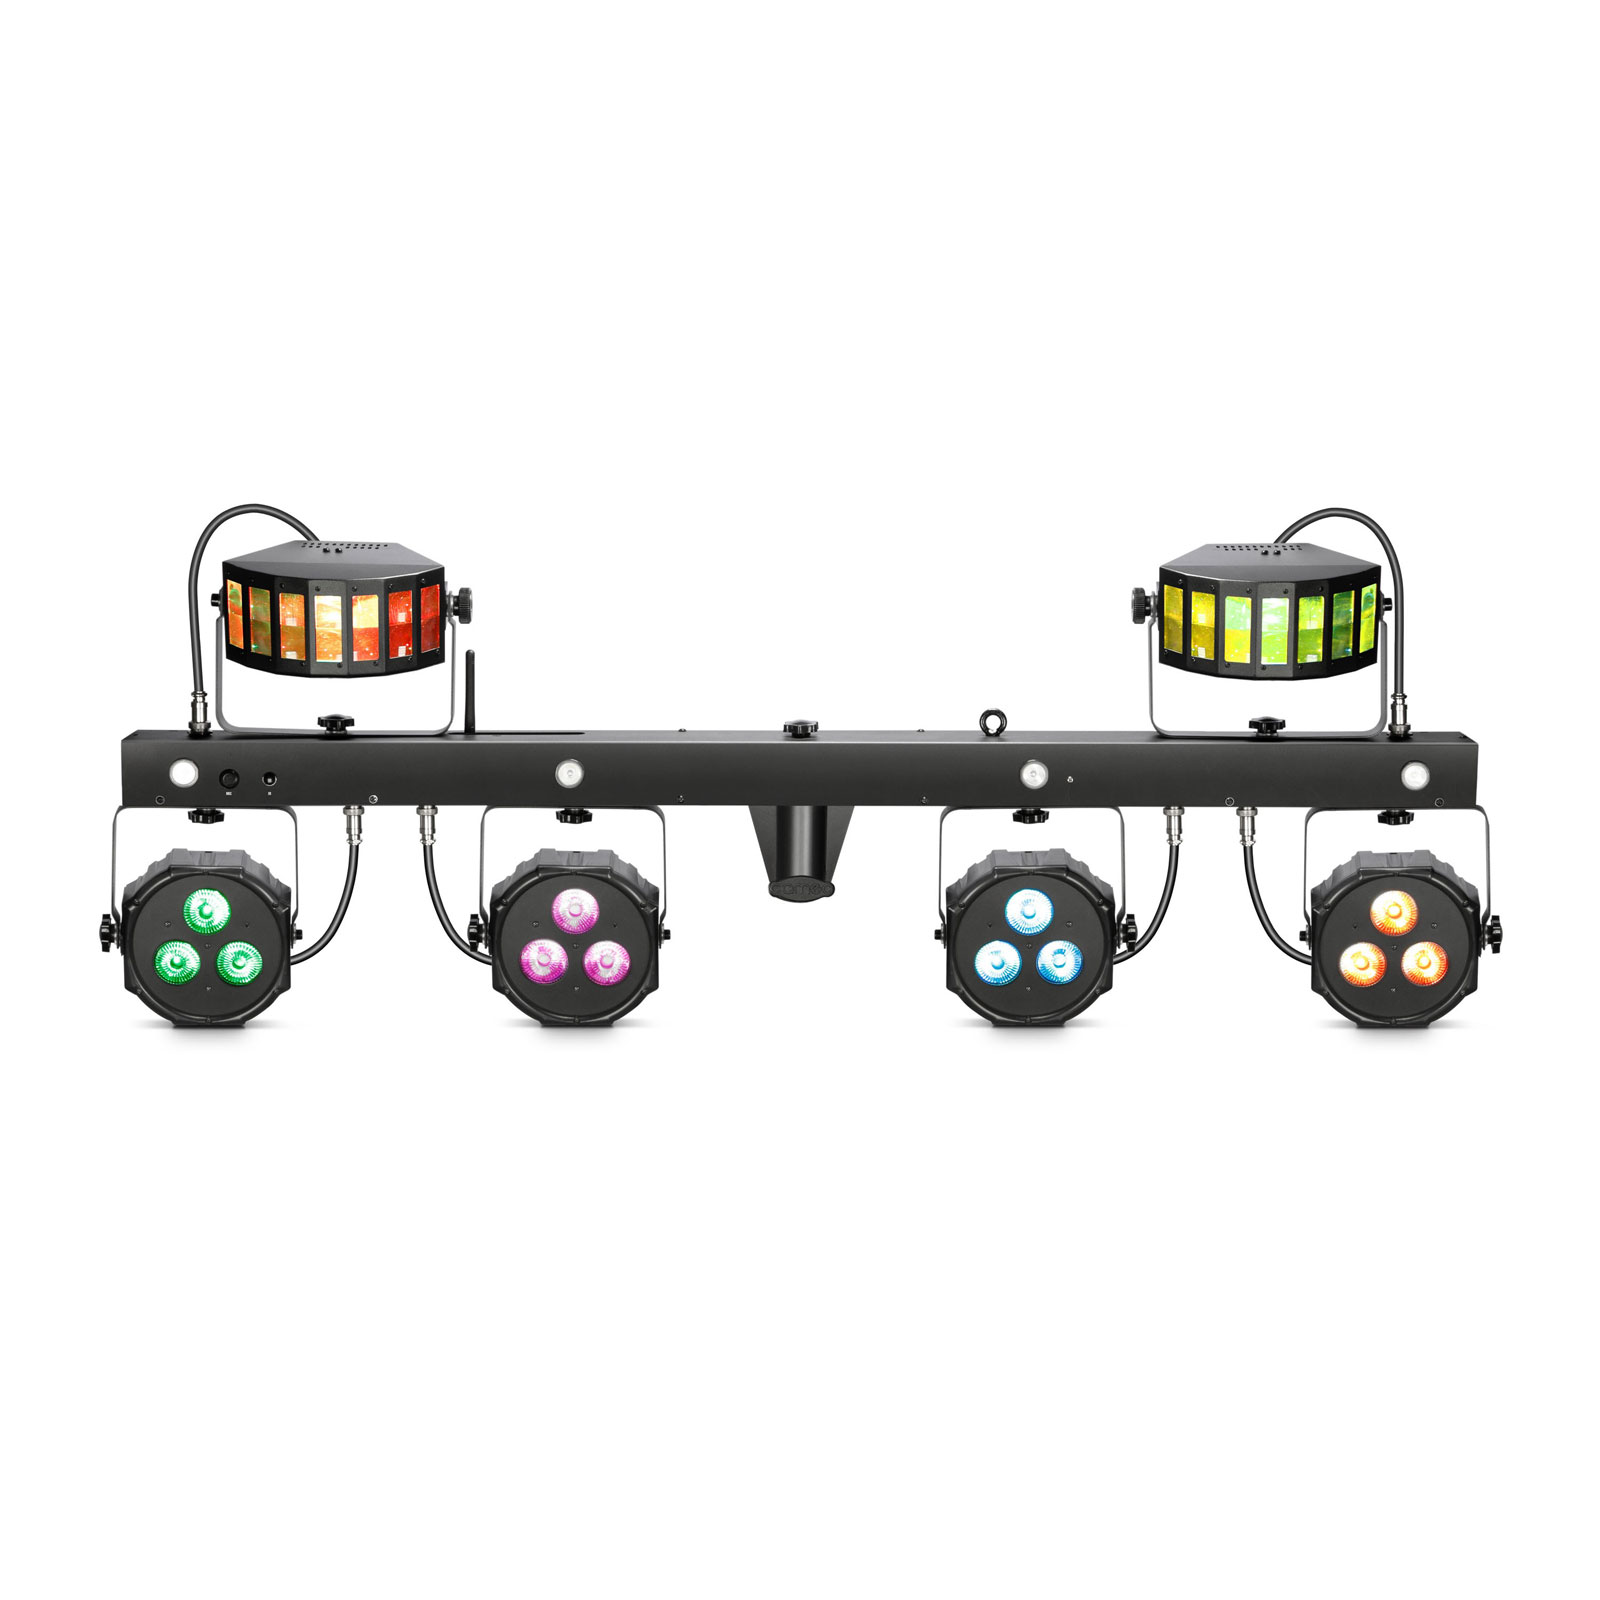 CAMEO MULTI FX BAR EZ - 3 LIGHT EFFECTS LIGHTING SYSTEM FOR MOBILE DJS AND GROUPS